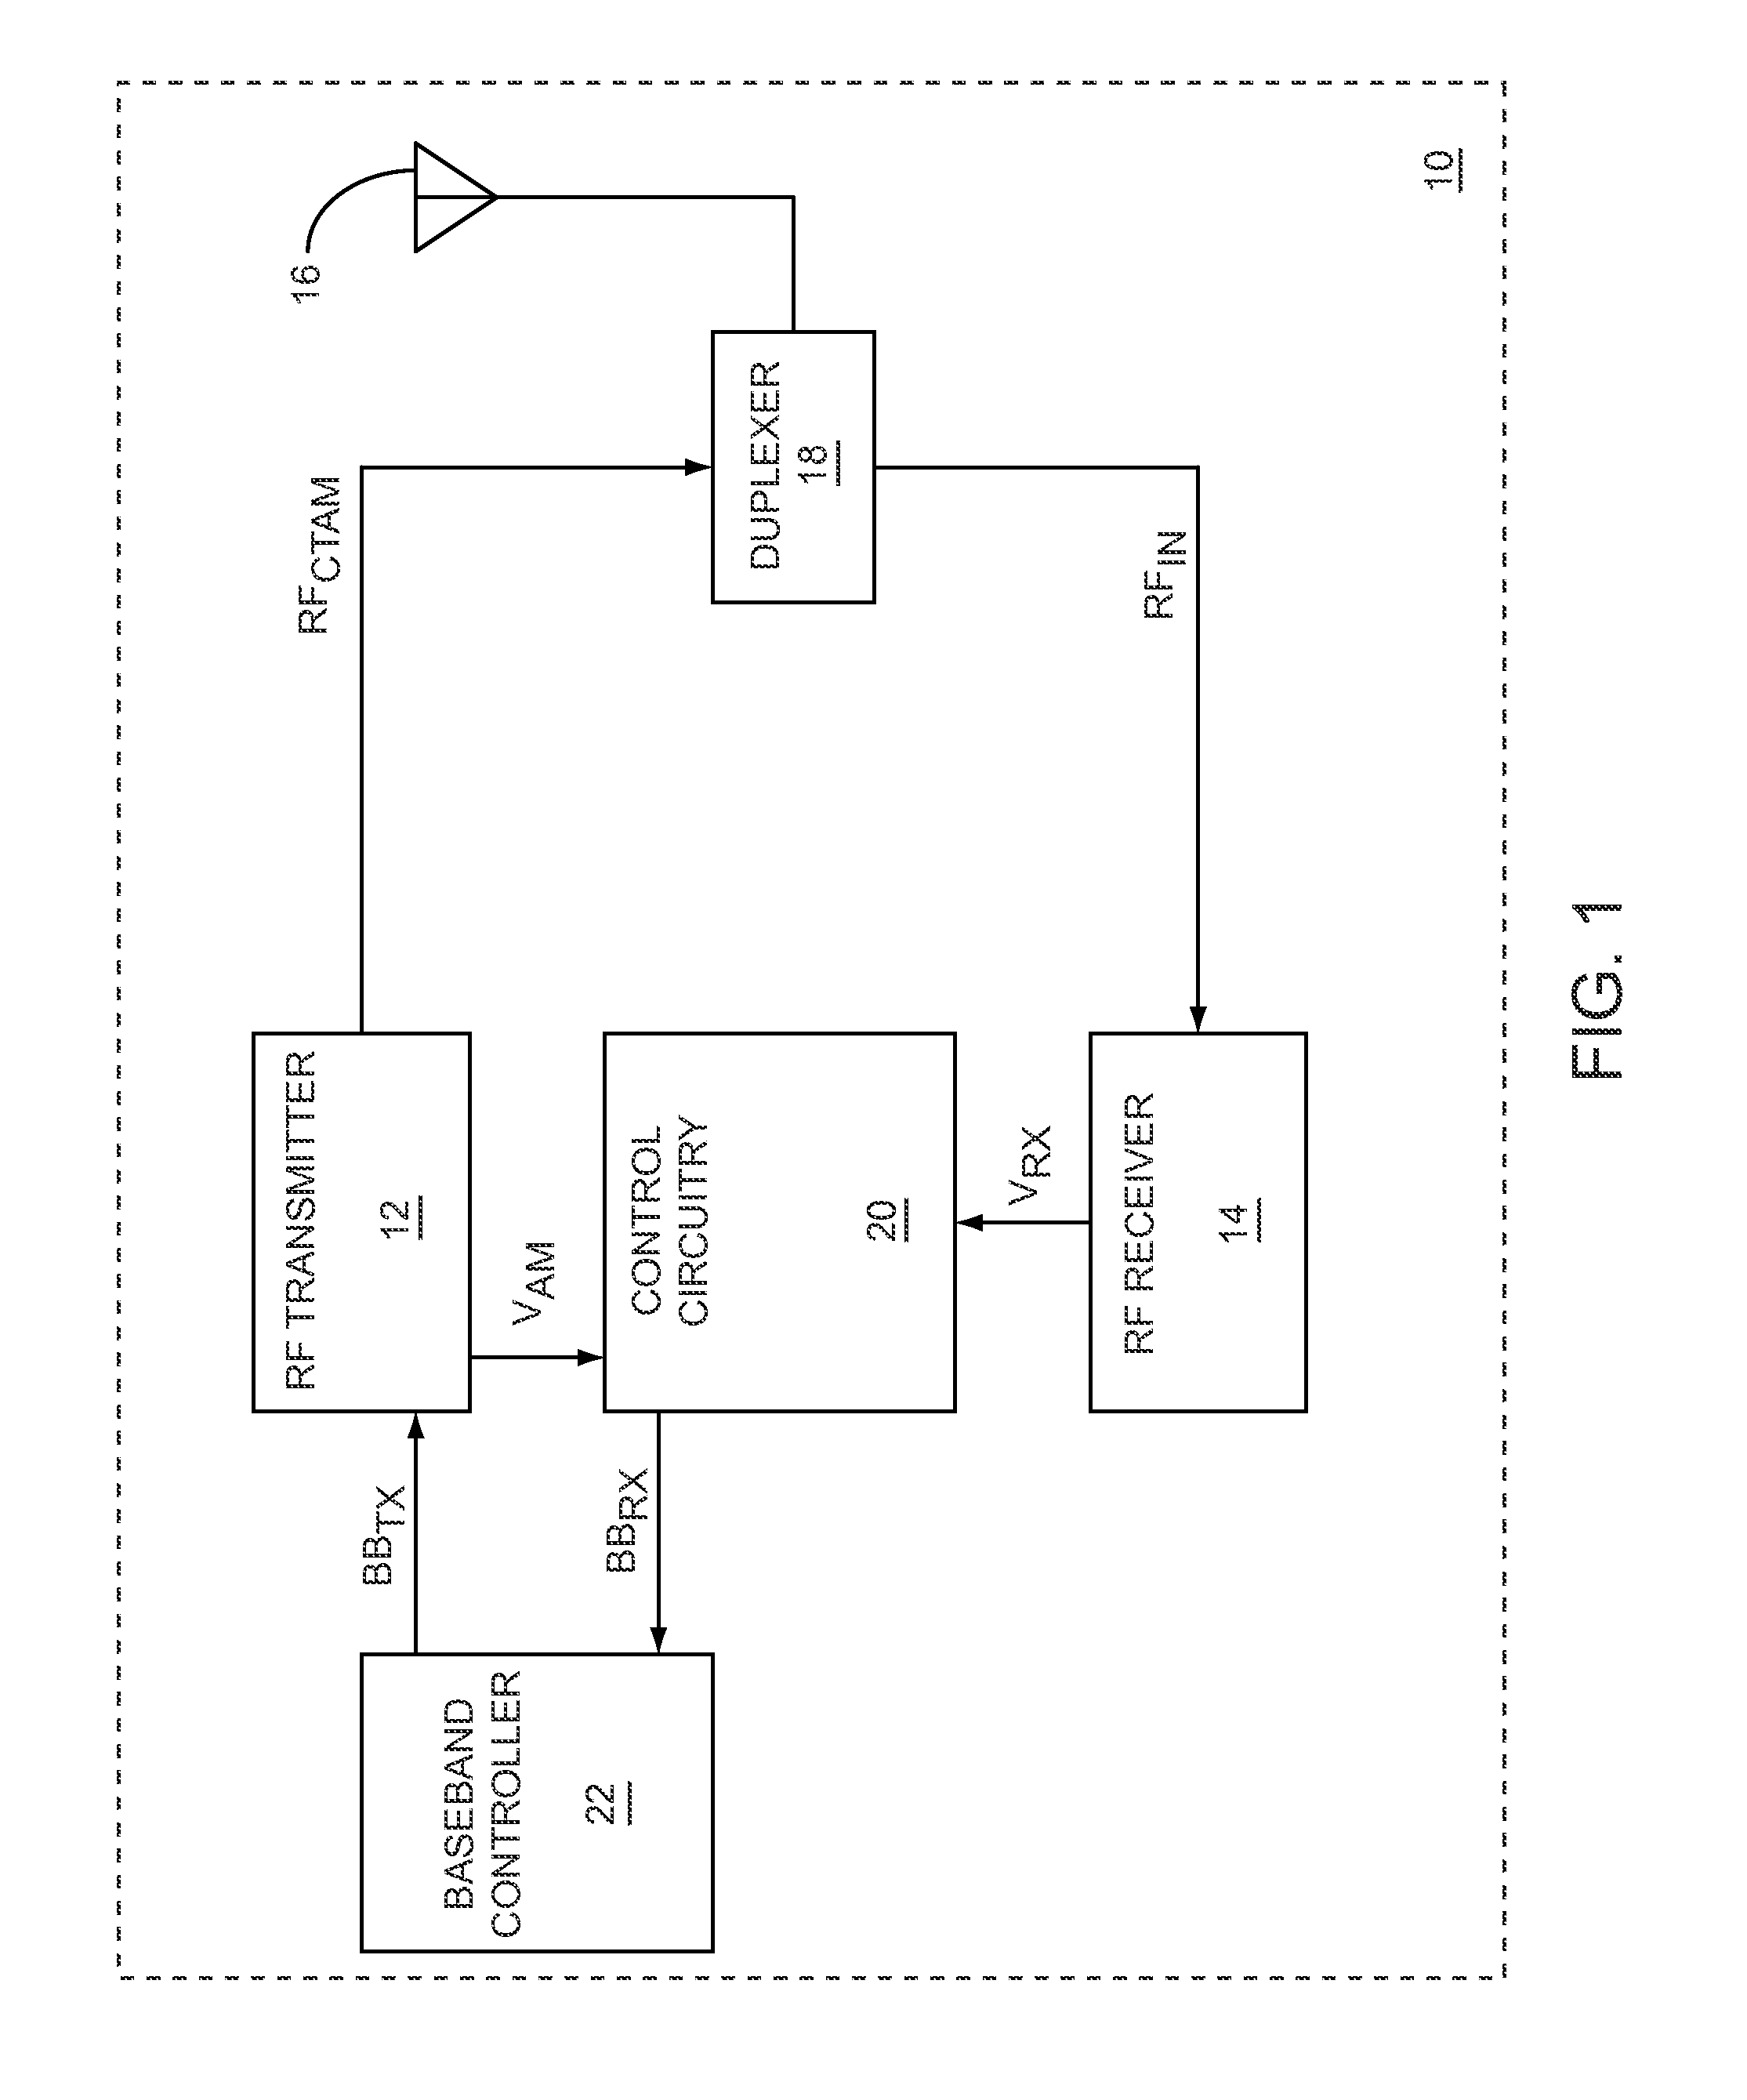 DC offset correction of a radio frequency receiver used with a continuous transmission radio frequency signal